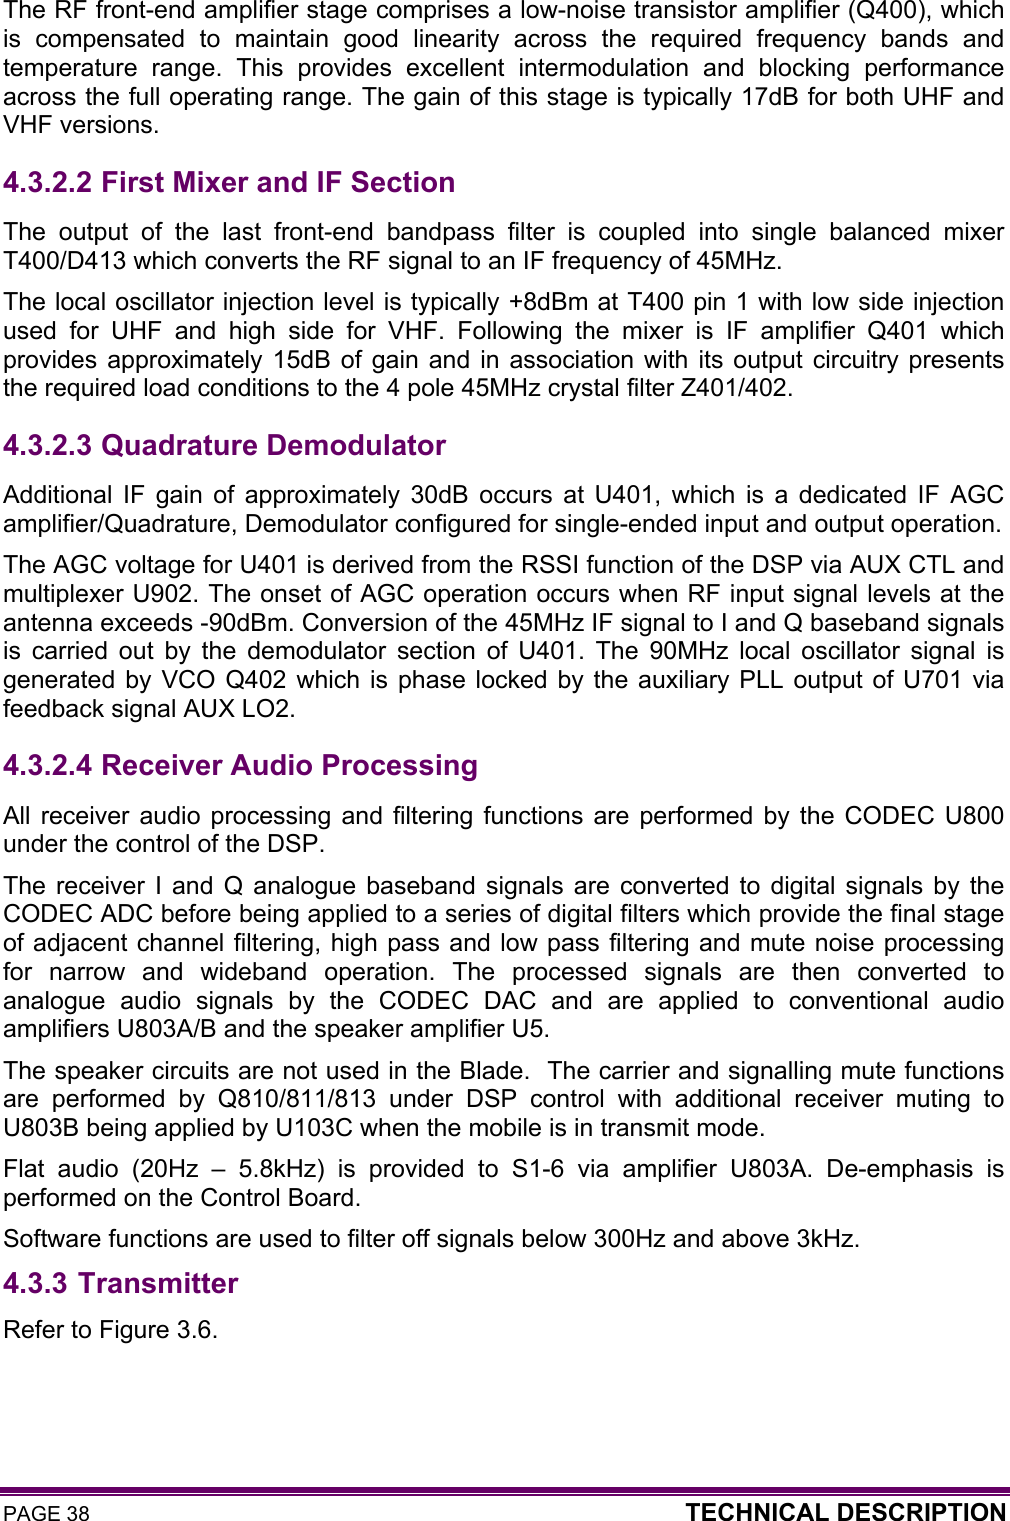 PAGE 38  TECHNICAL DESCRIPTION  The RF front-end amplifier stage comprises a low-noise transistor amplifier (Q400), which is compensated to maintain good linearity across the required frequency bands and temperature range. This provides excellent intermodulation and blocking performance across the full operating range. The gain of this stage is typically 17dB for both UHF and VHF versions. 4.3.2.2  First Mixer and IF Section The output of the last front-end bandpass filter is coupled into single balanced mixer T400/D413 which converts the RF signal to an IF frequency of 45MHz.  The local oscillator injection level is typically +8dBm at T400 pin 1 with low side injection used for UHF and high side for VHF. Following the mixer is IF amplifier Q401 which provides approximately 15dB of gain and in association with its output circuitry presents the required load conditions to the 4 pole 45MHz crystal filter Z401/402.  4.3.2.3  Quadrature Demodulator Additional IF gain of approximately 30dB occurs at U401, which is a dedicated IF AGC amplifier/Quadrature, Demodulator configured for single-ended input and output operation.  The AGC voltage for U401 is derived from the RSSI function of the DSP via AUX CTL and multiplexer U902. The onset of AGC operation occurs when RF input signal levels at the antenna exceeds -90dBm. Conversion of the 45MHz IF signal to I and Q baseband signals is carried out by the demodulator section of U401. The 90MHz local oscillator signal is generated by VCO Q402 which is phase locked by the auxiliary PLL output of U701 via feedback signal AUX LO2.  4.3.2.4  Receiver Audio Processing All receiver audio processing and filtering functions are performed by the CODEC U800 under the control of the DSP. The receiver I and Q analogue baseband signals are converted to digital signals by the CODEC ADC before being applied to a series of digital filters which provide the final stage of adjacent channel filtering, high pass and low pass filtering and mute noise processing for narrow and wideband operation. The processed signals are then converted to analogue audio signals by the CODEC DAC and are applied to conventional audio amplifiers U803A/B and the speaker amplifier U5.  The speaker circuits are not used in the Blade.  The carrier and signalling mute functions are performed by Q810/811/813 under DSP control with additional receiver muting to U803B being applied by U103C when the mobile is in transmit mode.  Flat audio (20Hz – 5.8kHz) is provided to S1-6 via amplifier U803A. De-emphasis is performed on the Control Board.  Software functions are used to filter off signals below 300Hz and above 3kHz. 4.3.3 Transmitter Refer to Figure 3.6. 